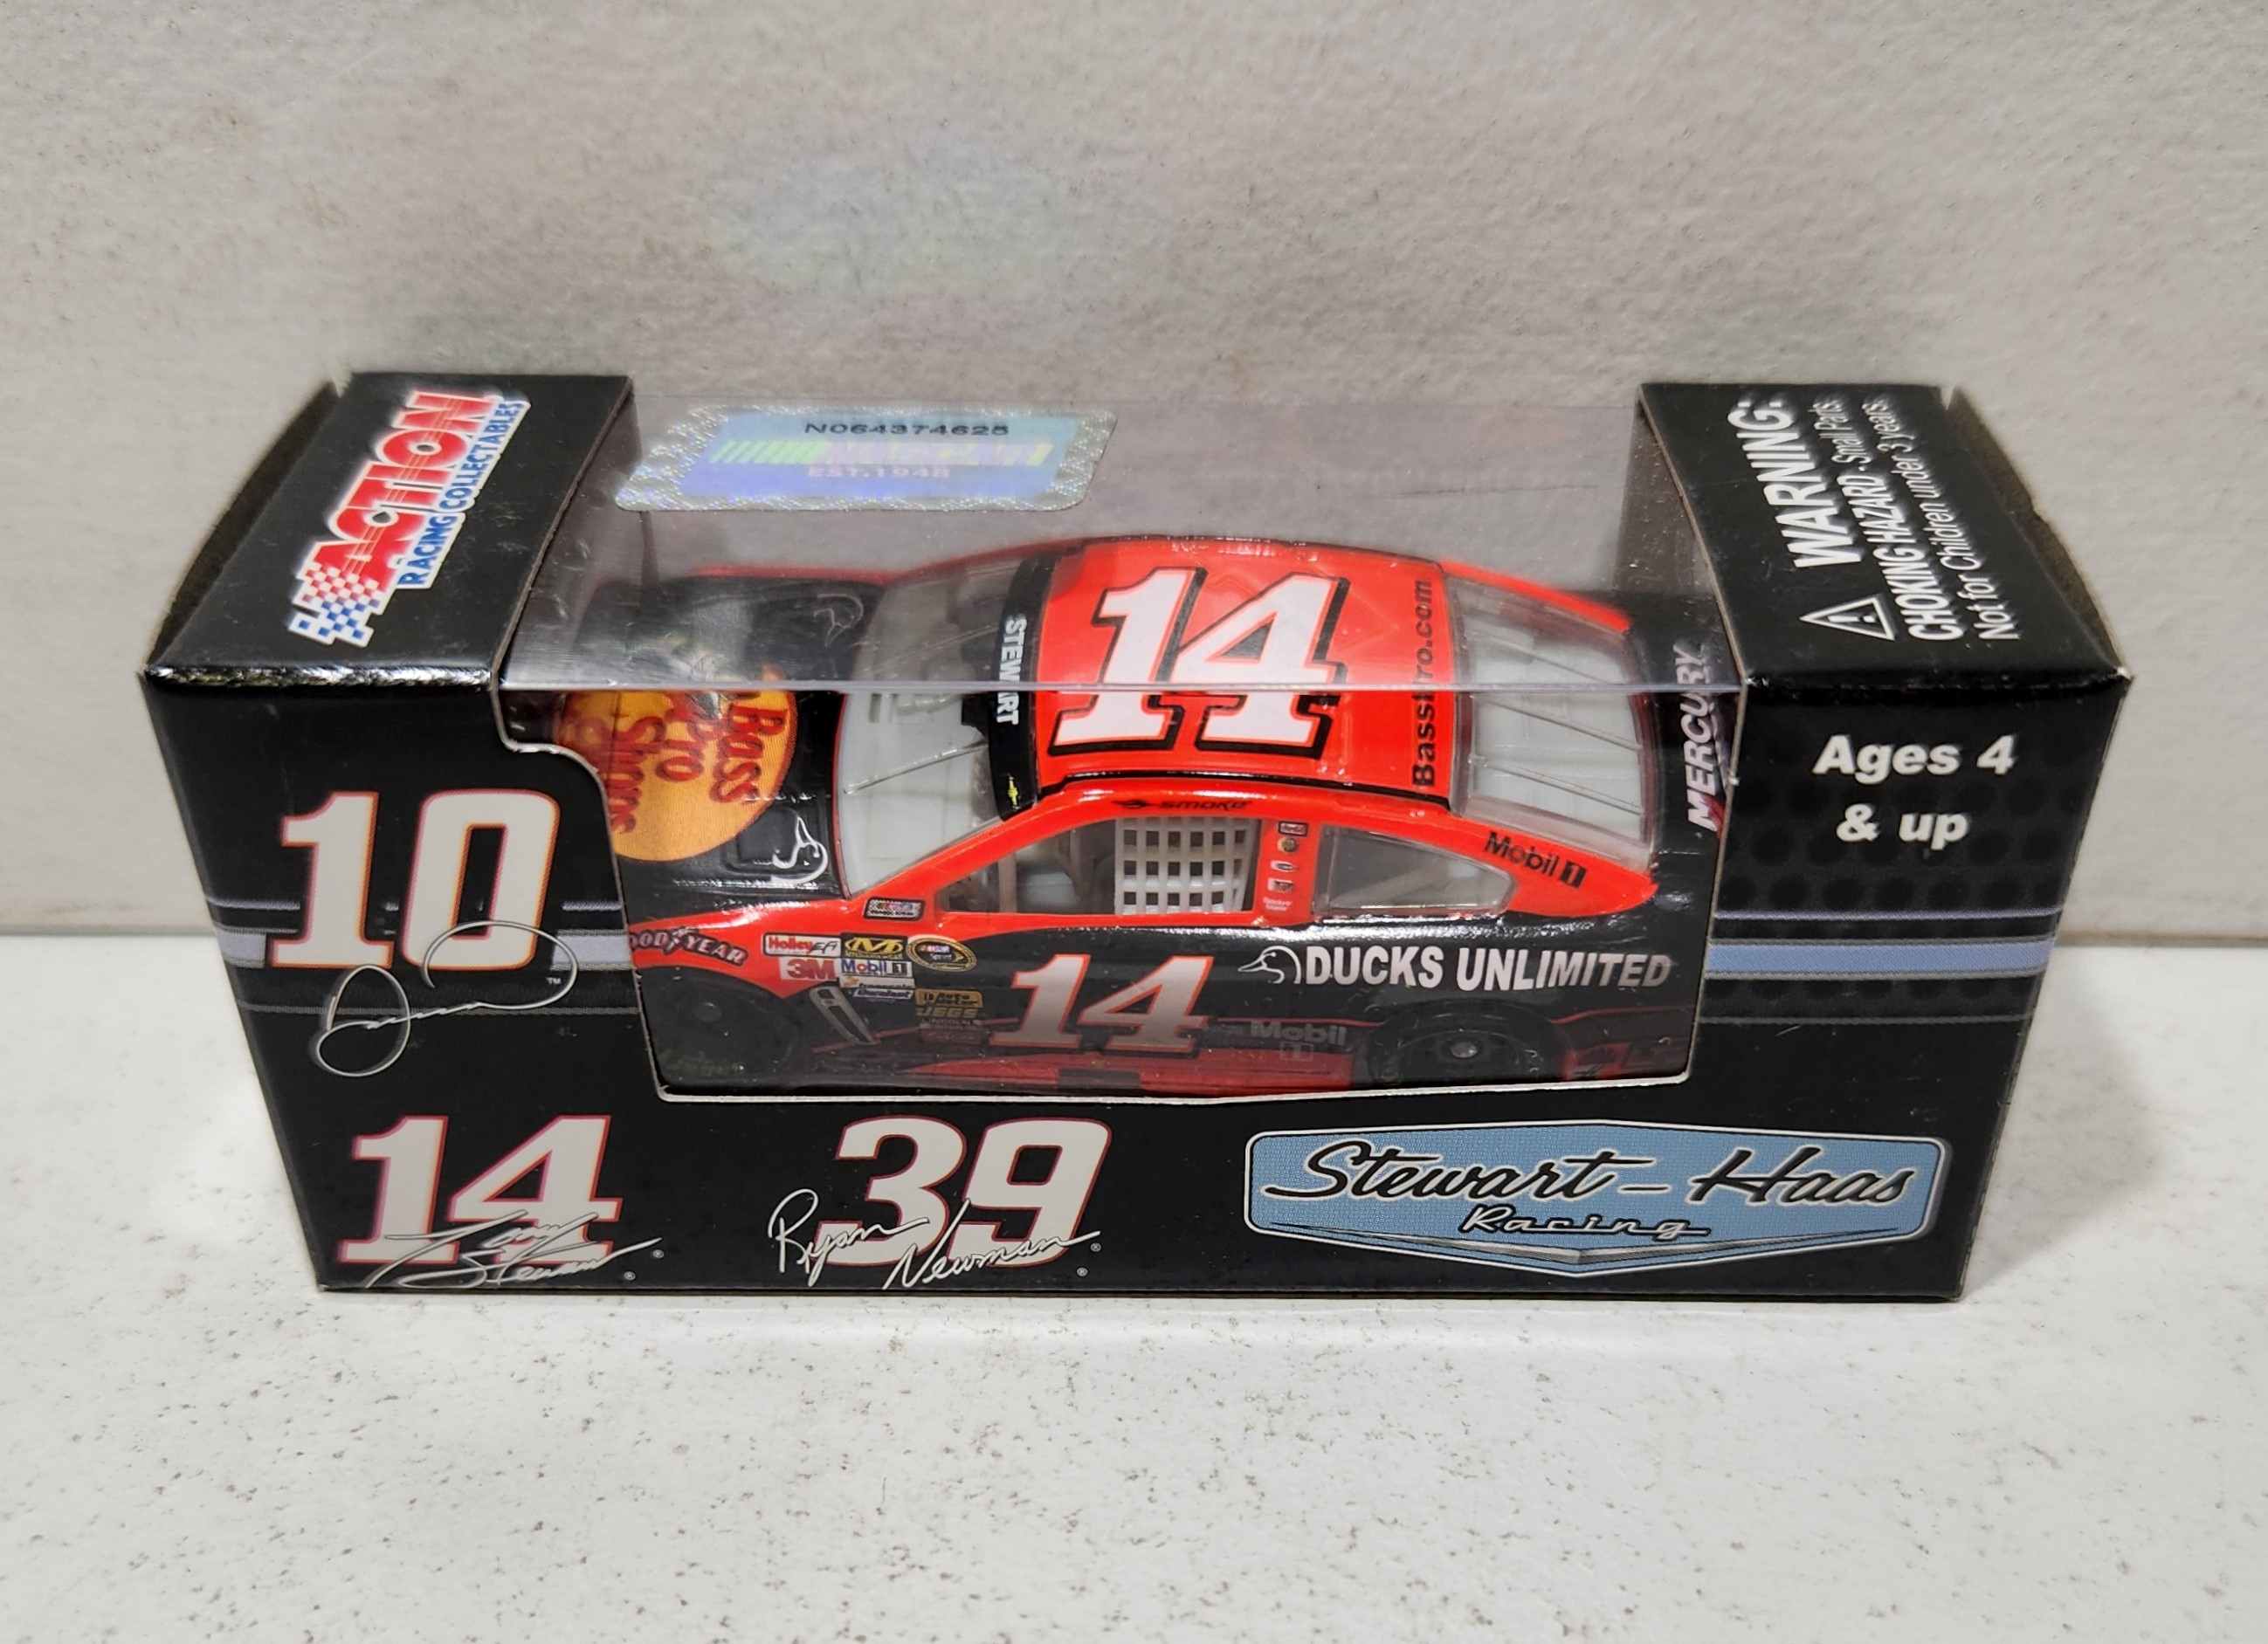 2013 Tony Stewart 1/64th Bass Pro Shops "Ducks Unlimited" Pitstop Series Chevrolet SS